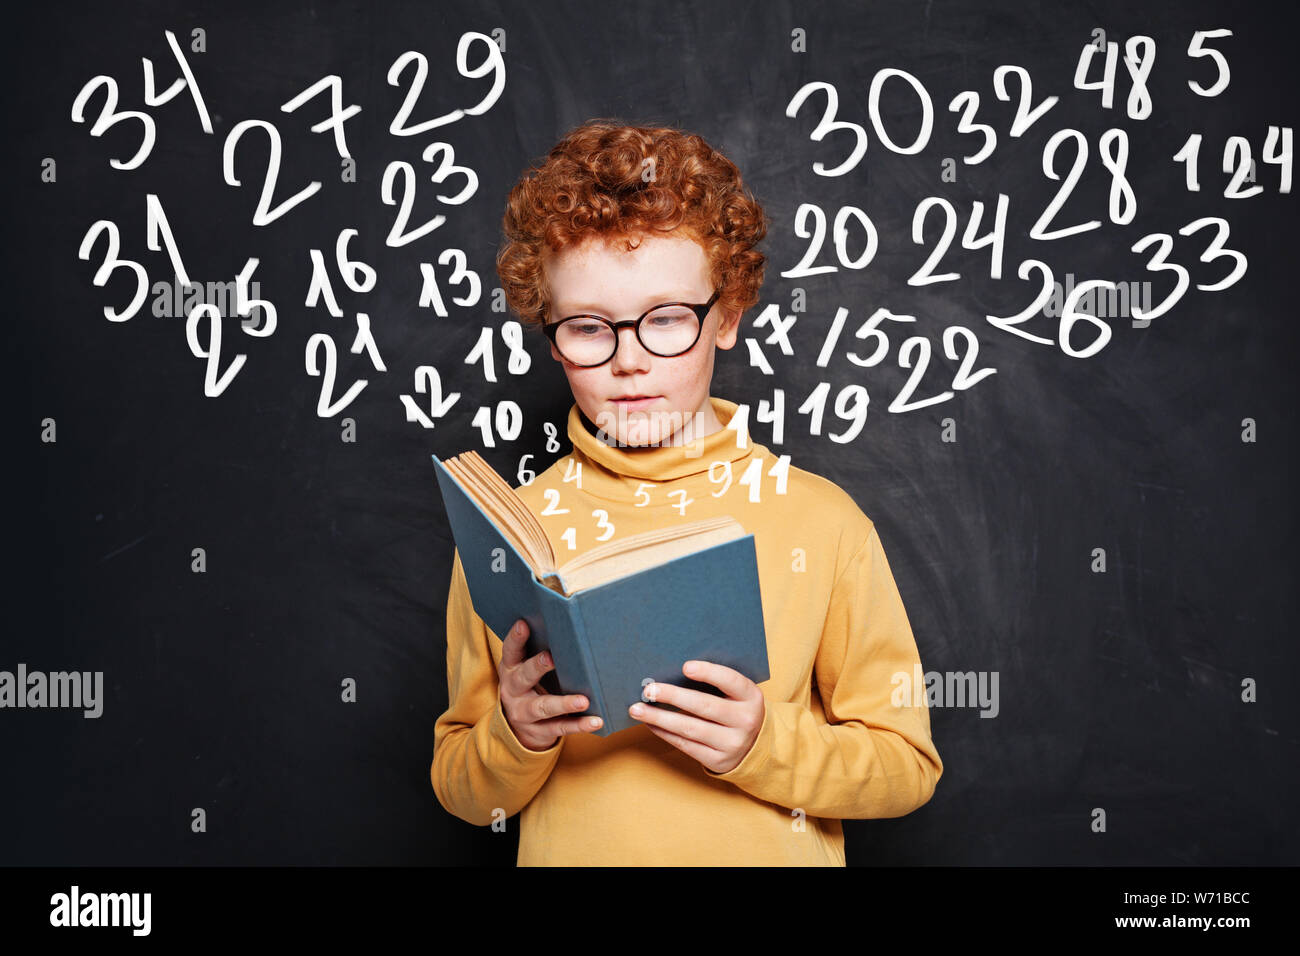 Kid reading a book on chalkboard background Stock Photo